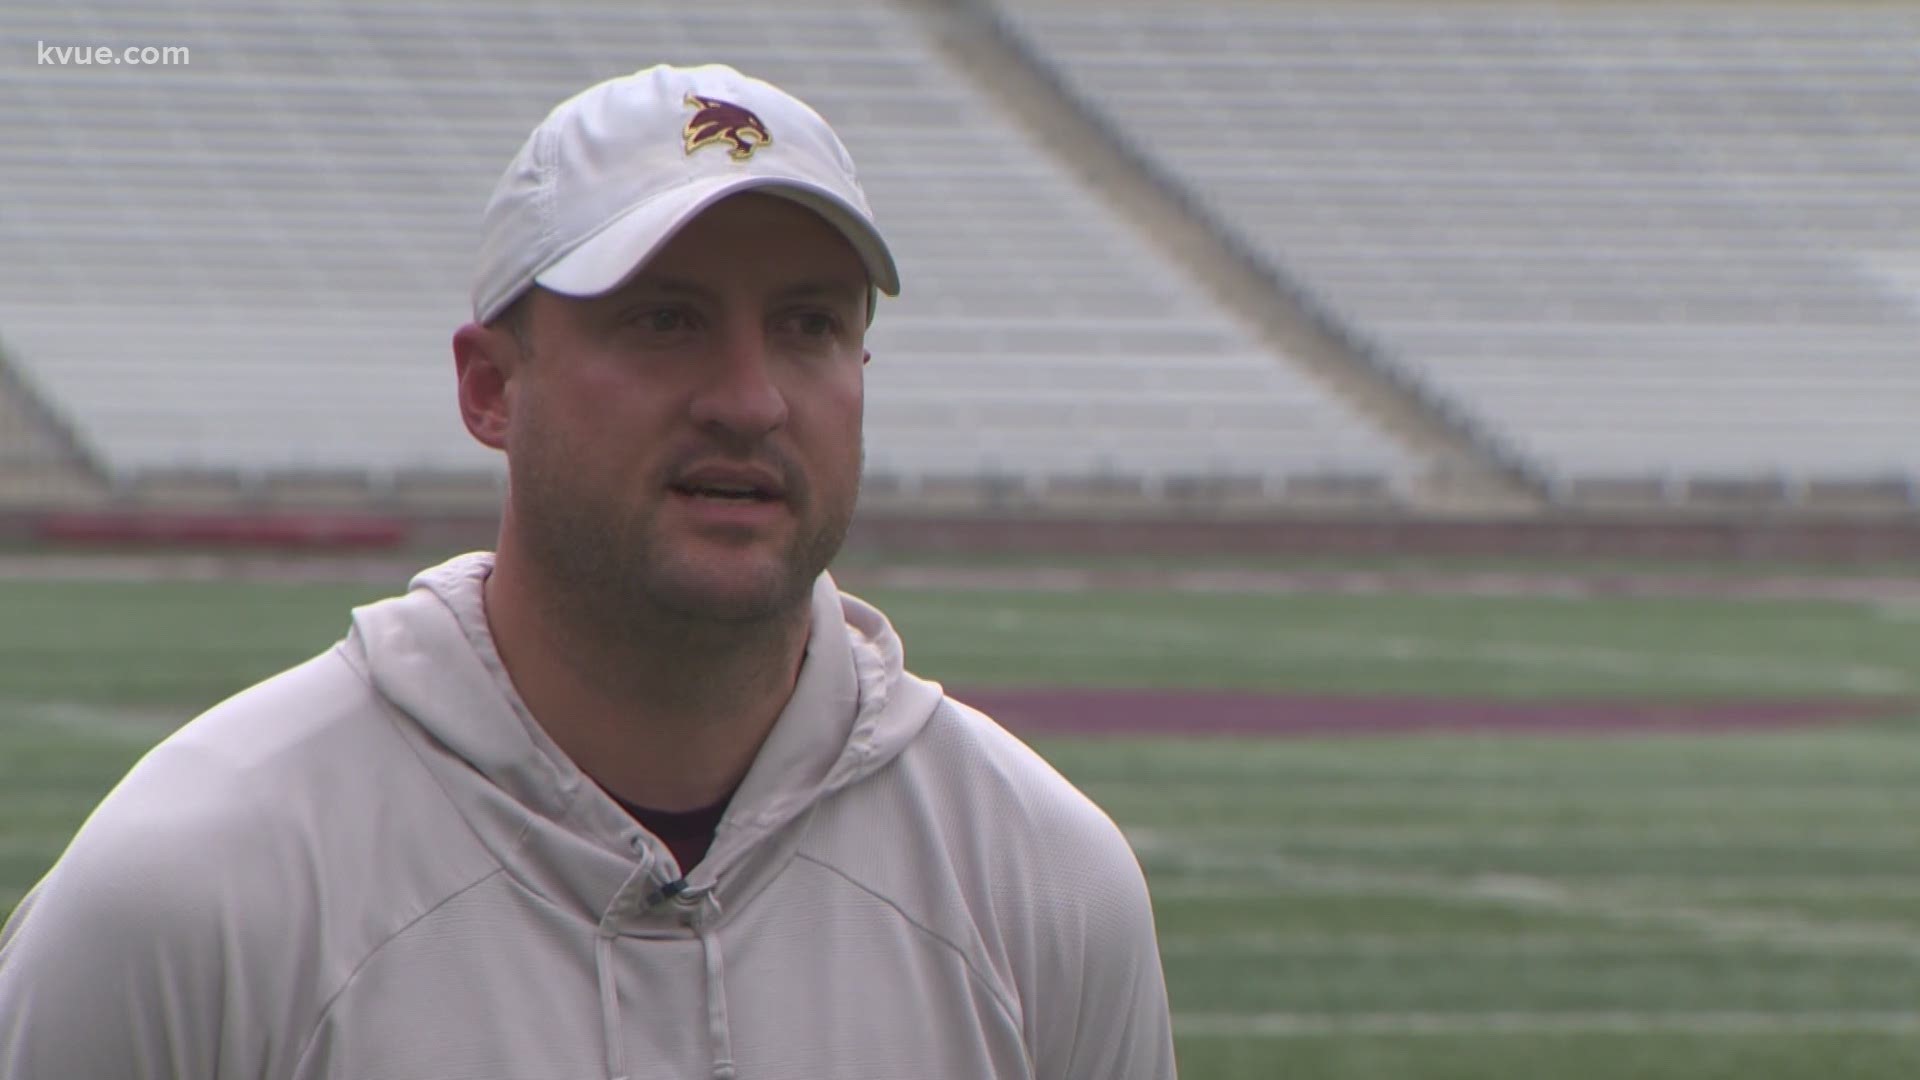 Texas State University coach Jake Spavital spoke with KVUE about the season opener against SMU. Four Bobcats are in quarantine and will miss the game.